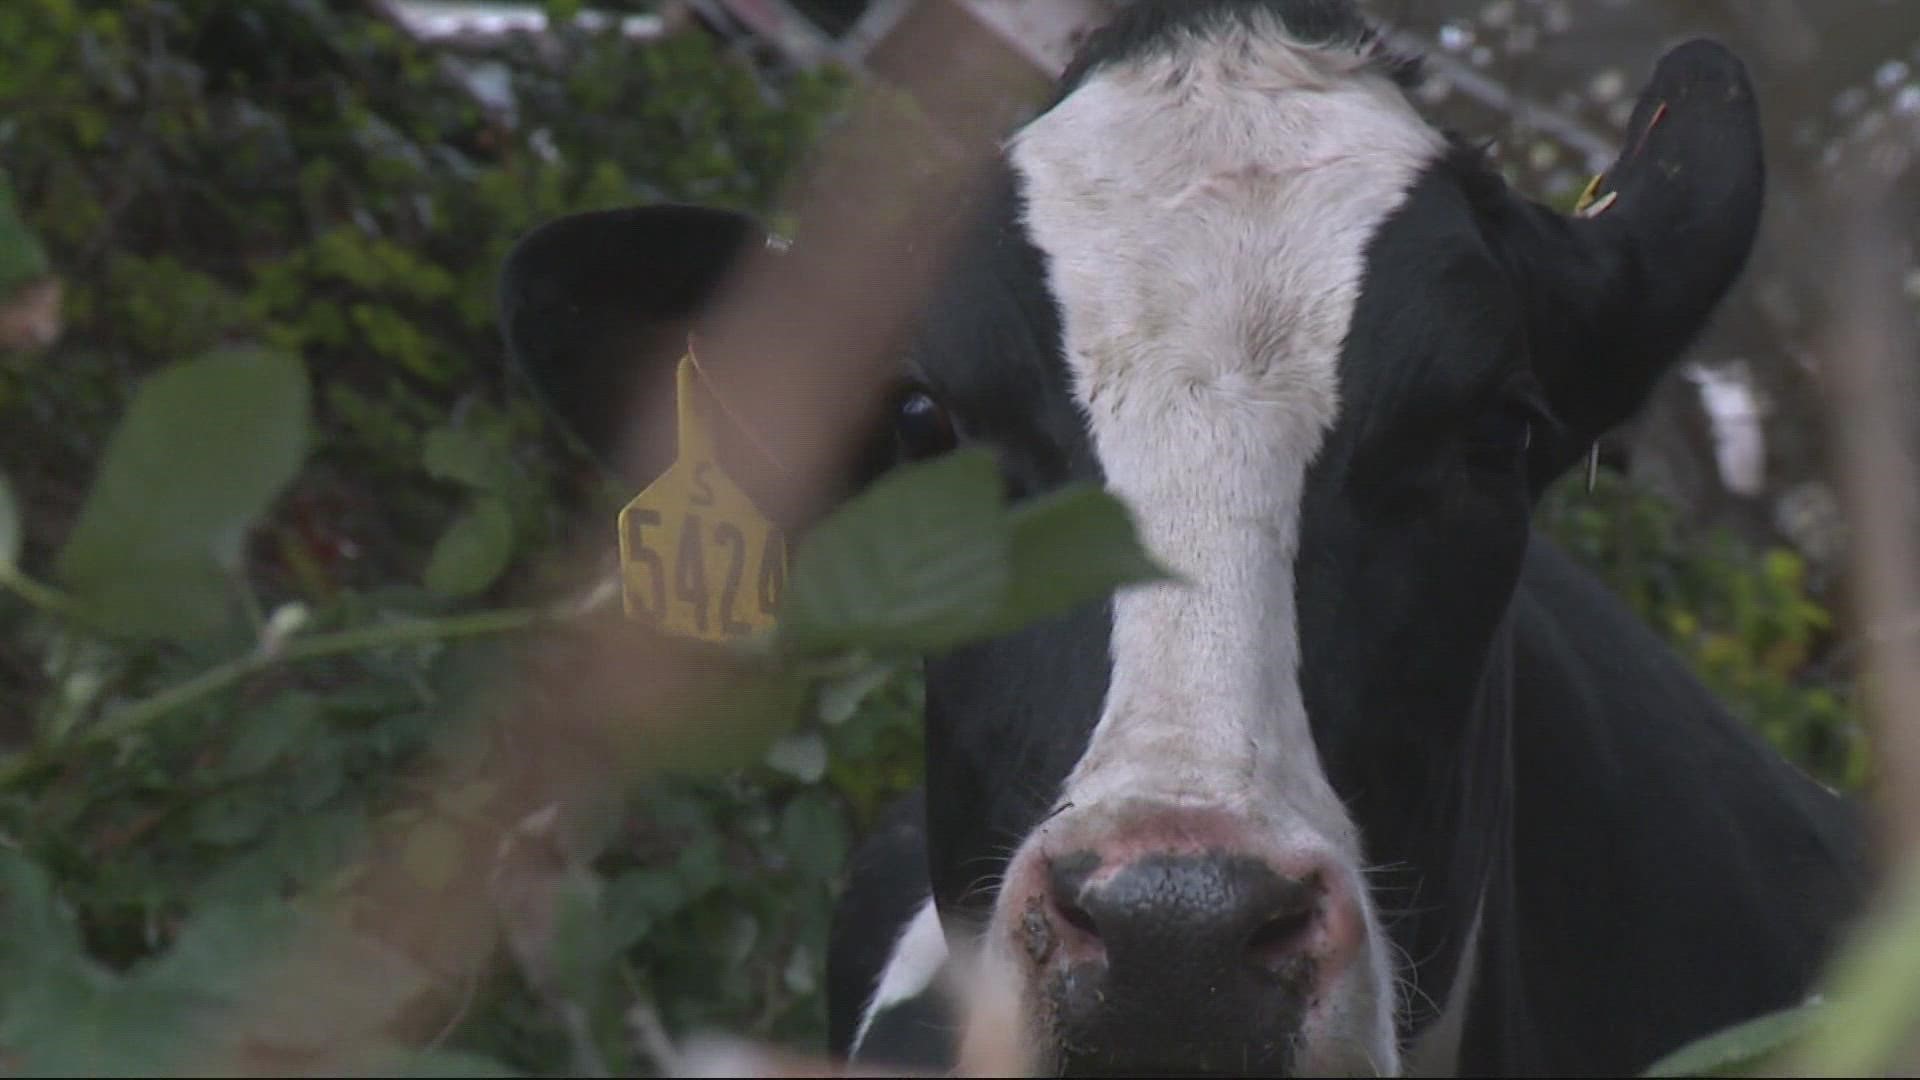 An accident shut down I-5 near Wilsonville for hours as authorities tried to wrangle cows off the road.